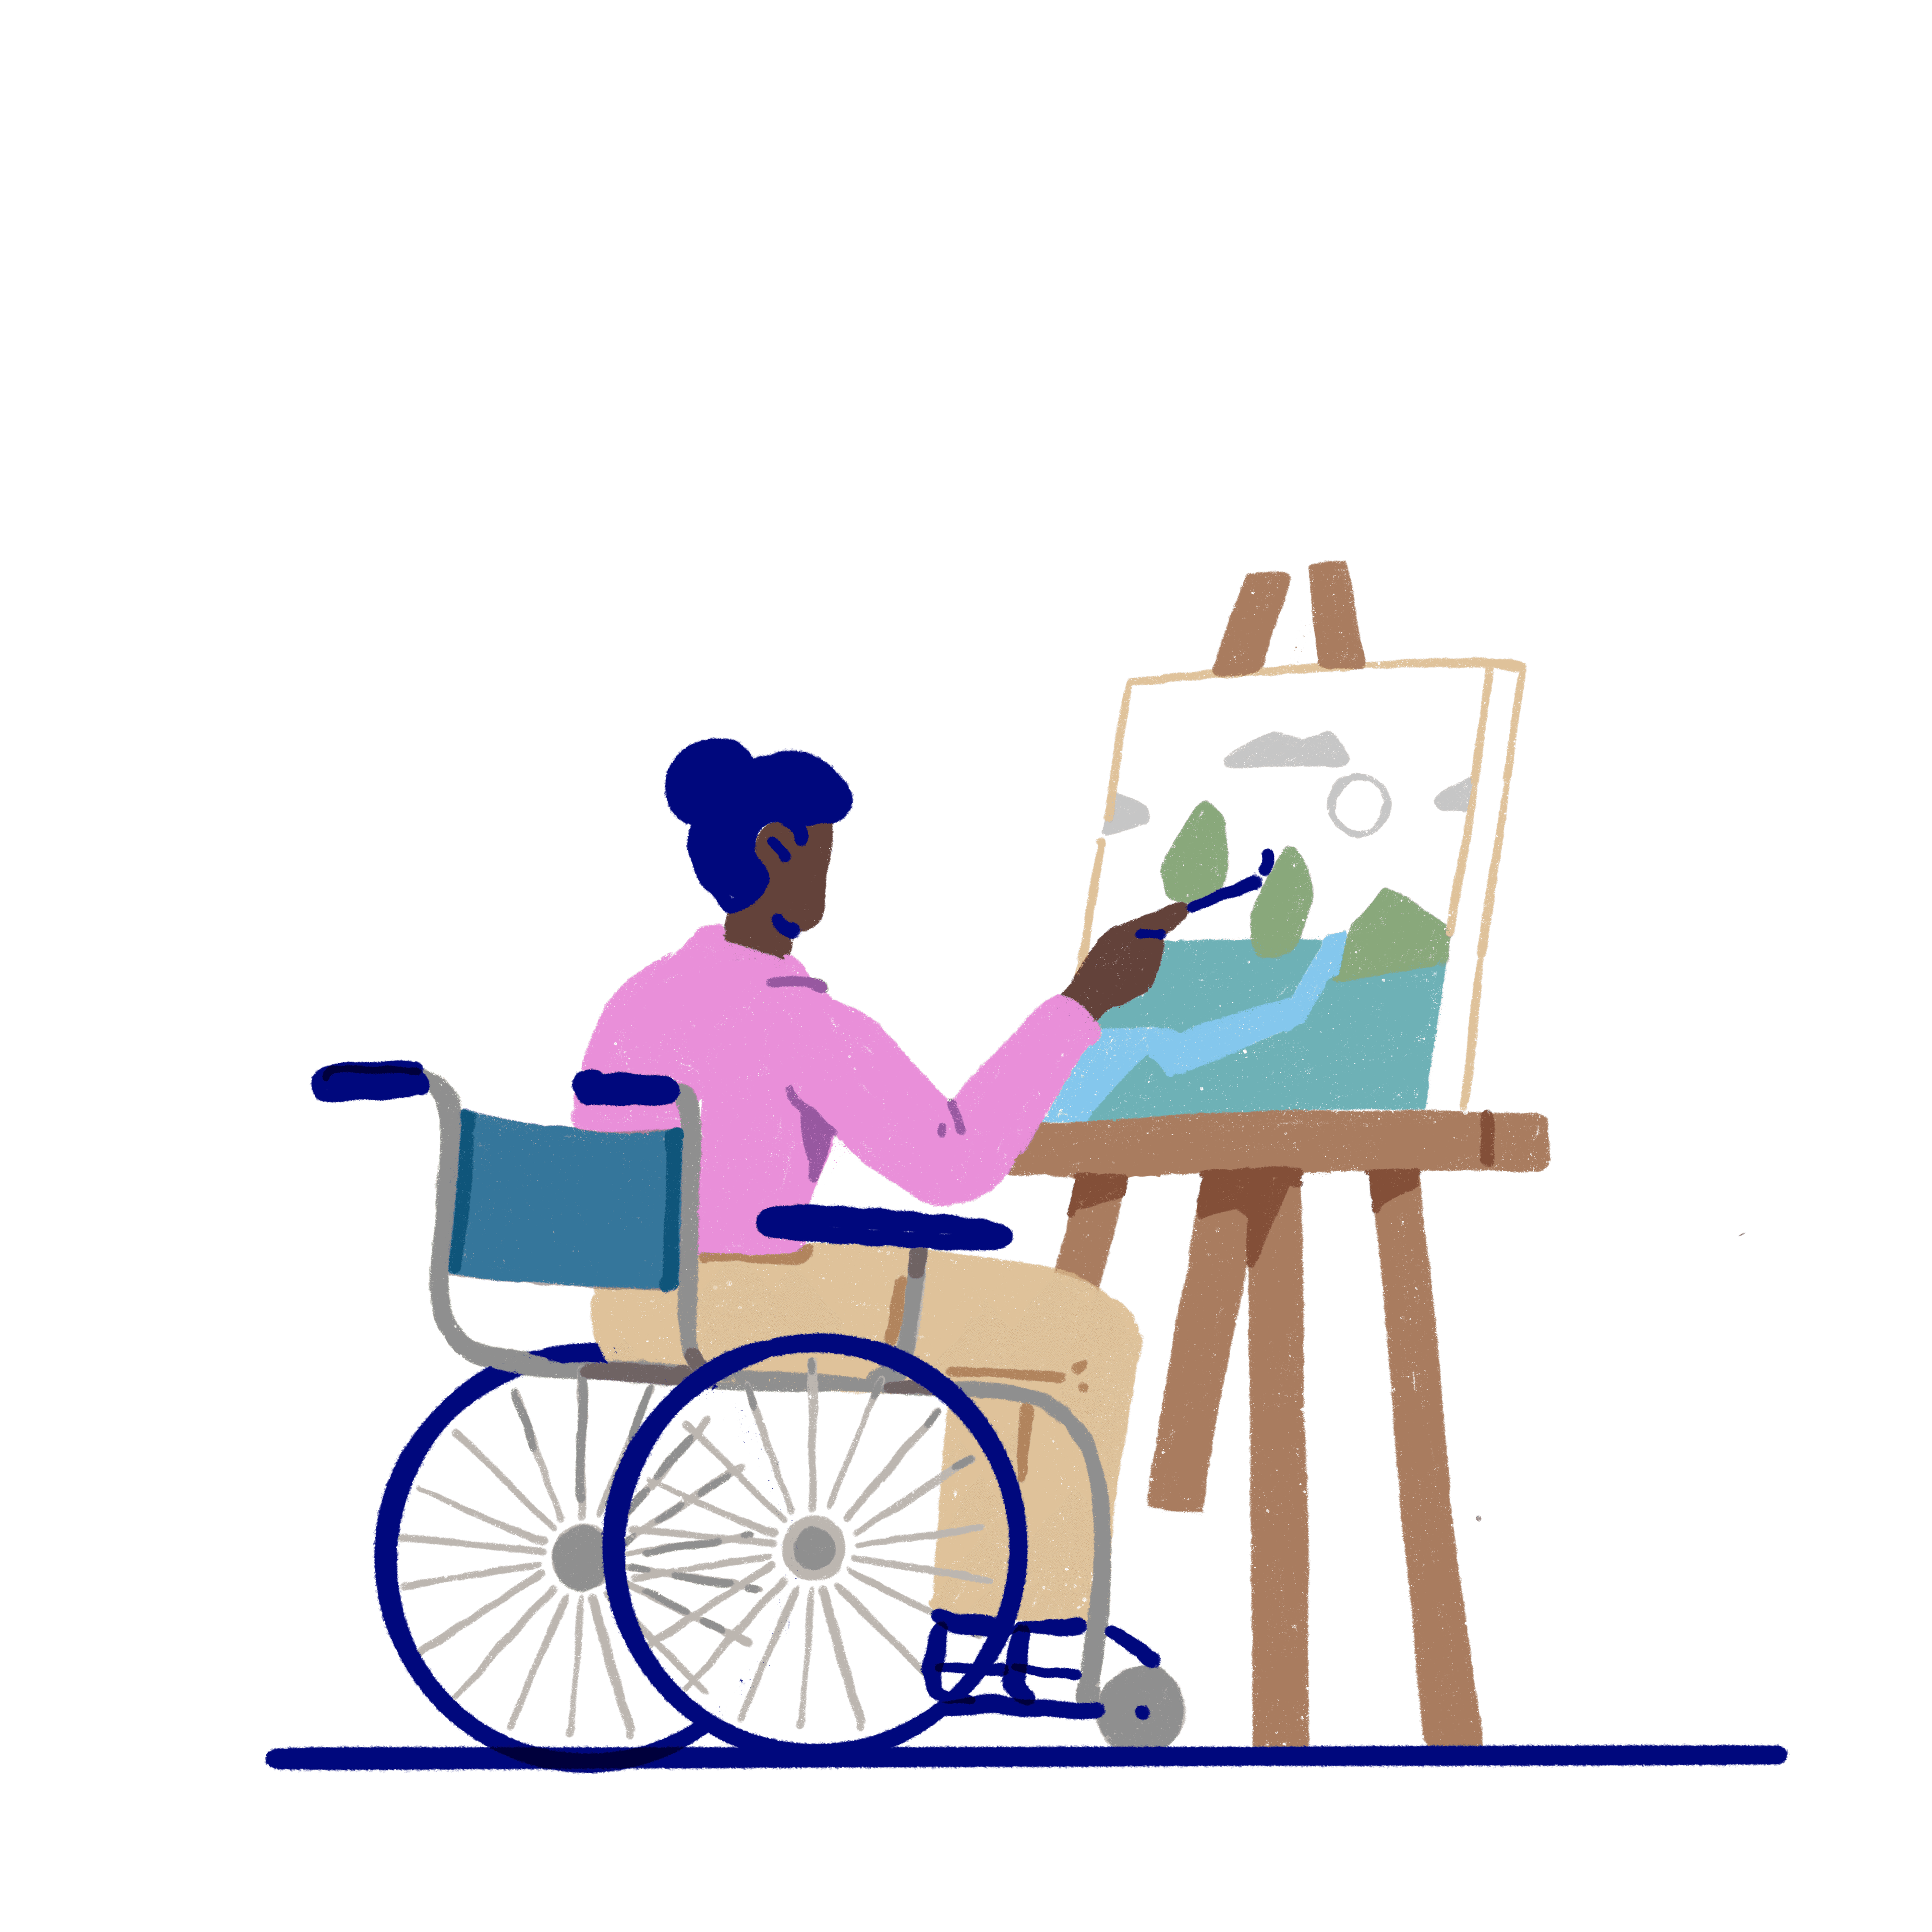 Person in a wheelchair painting a picture on an easel